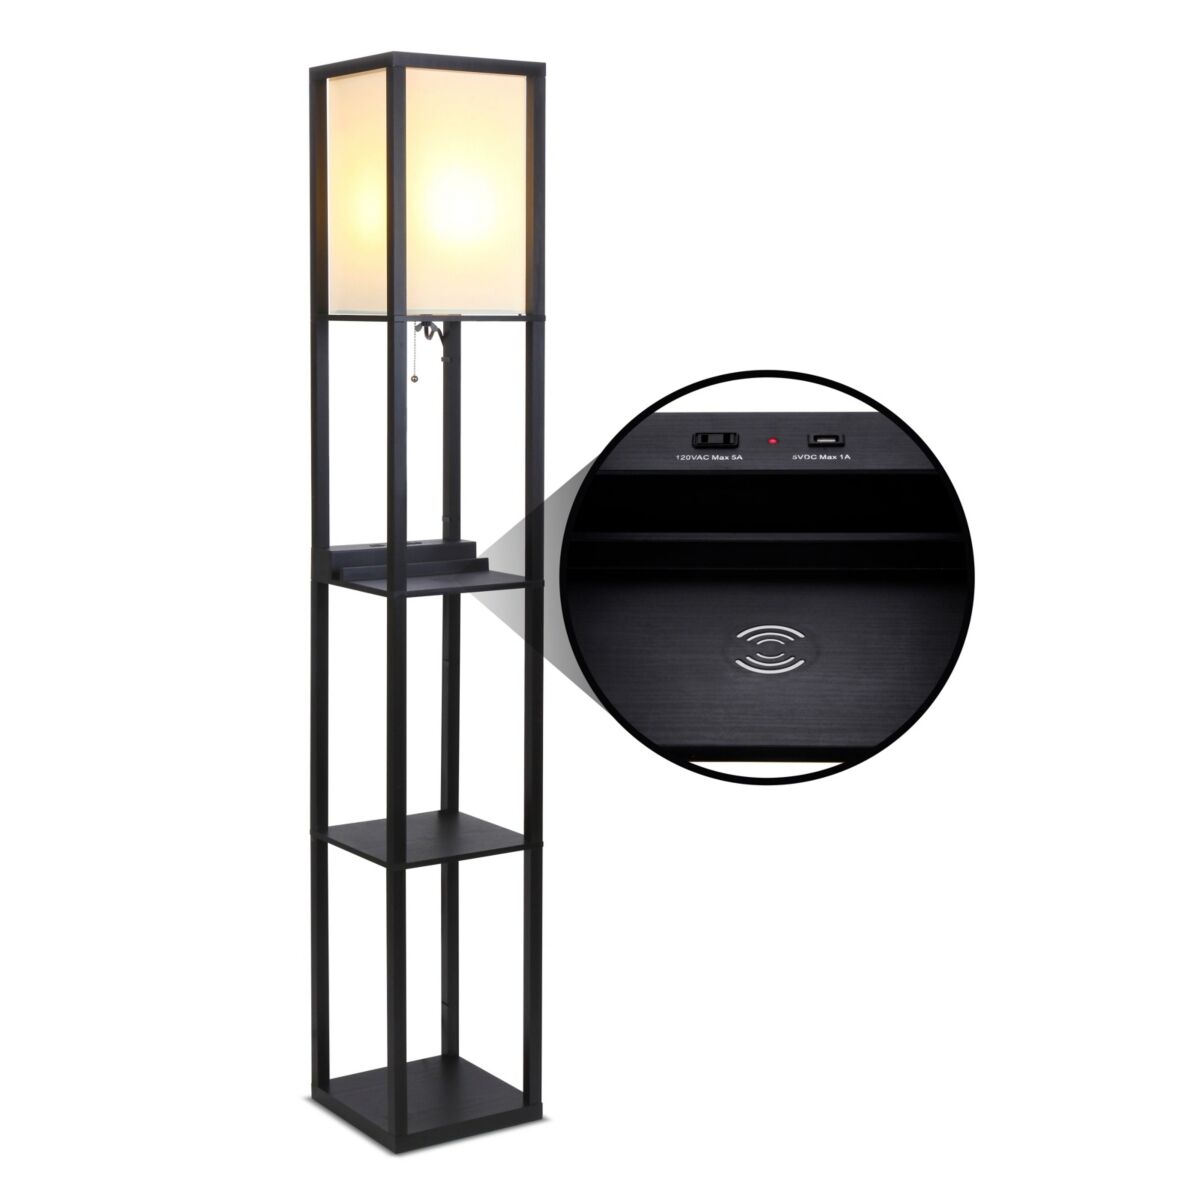 Brightech Maxwell Shelf & Led Floor Lamp - Usb Port, Outlet, Wireless Charging Pad - Classic Black